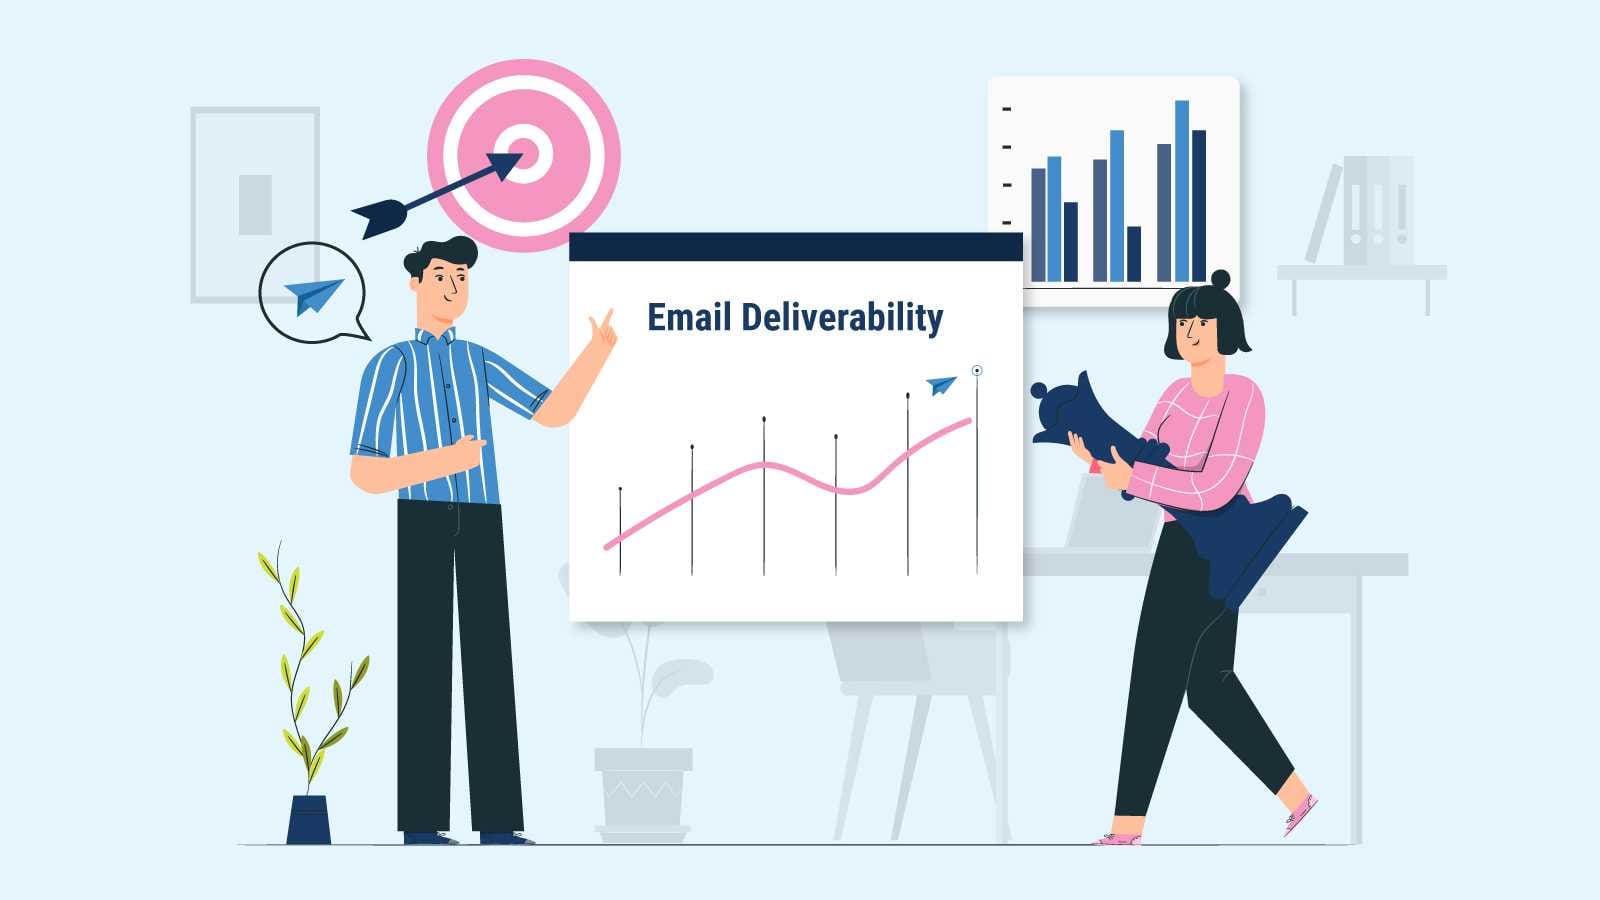 Developing email deliverability